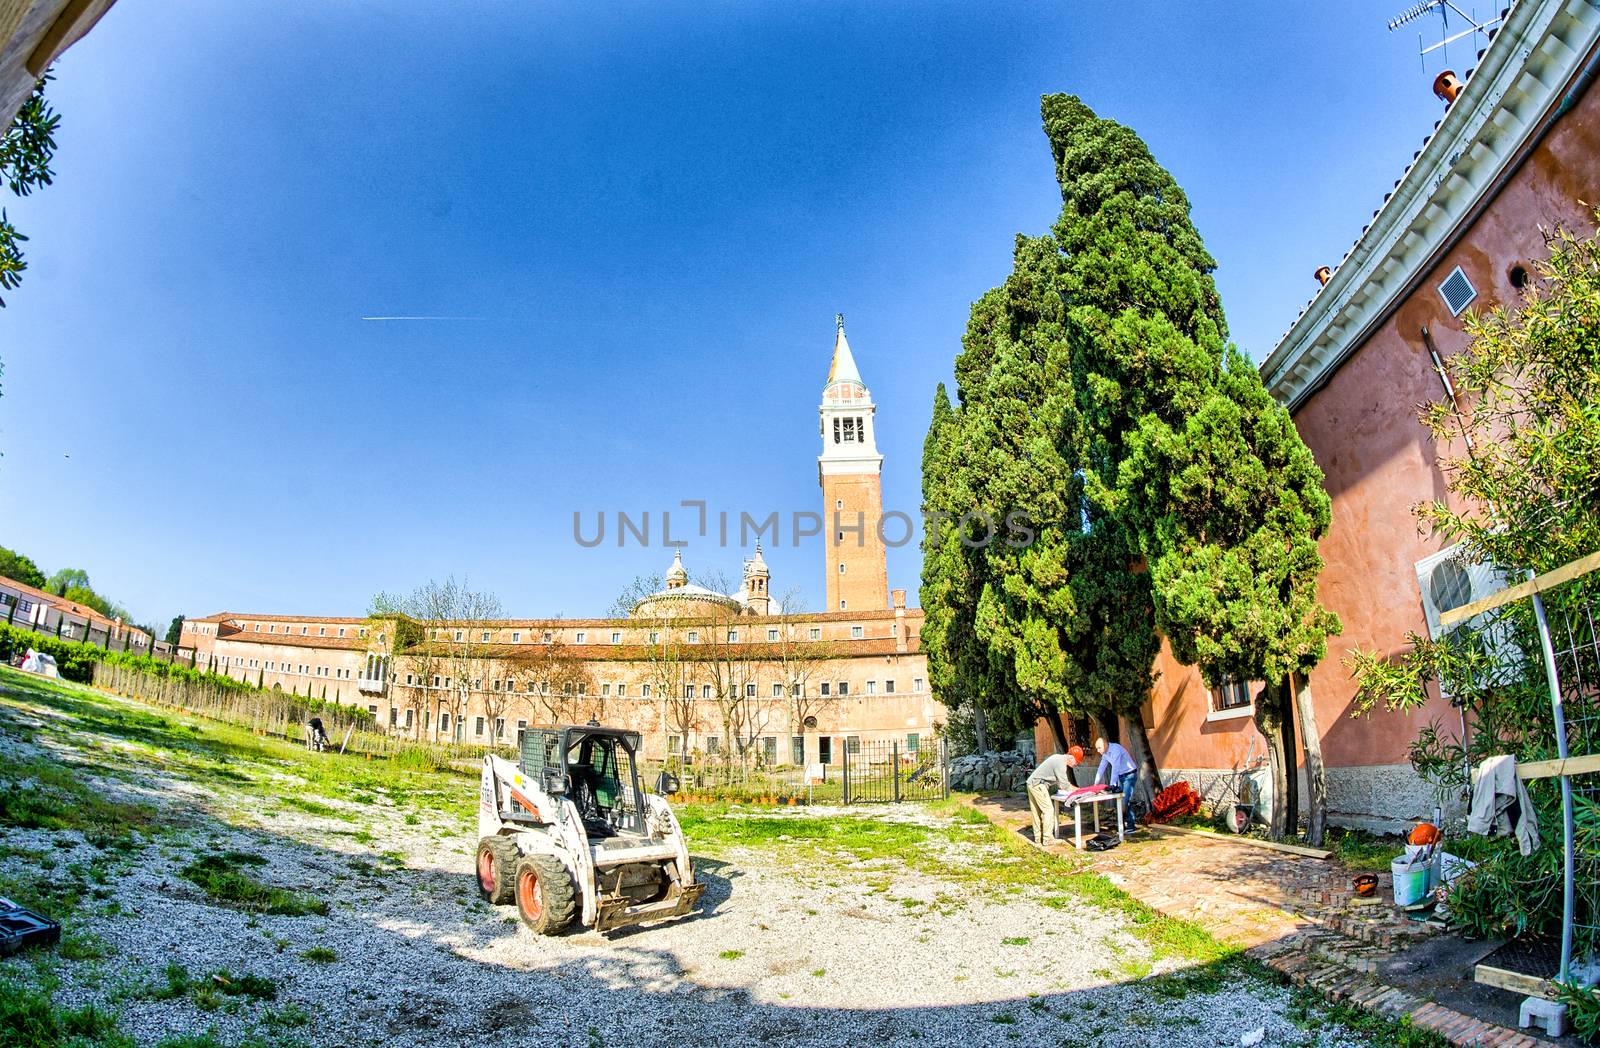 VENICE - APRIL 7, 2014: City streets on a beautiful spring day. Venice is visted by more than 20 million people every year.